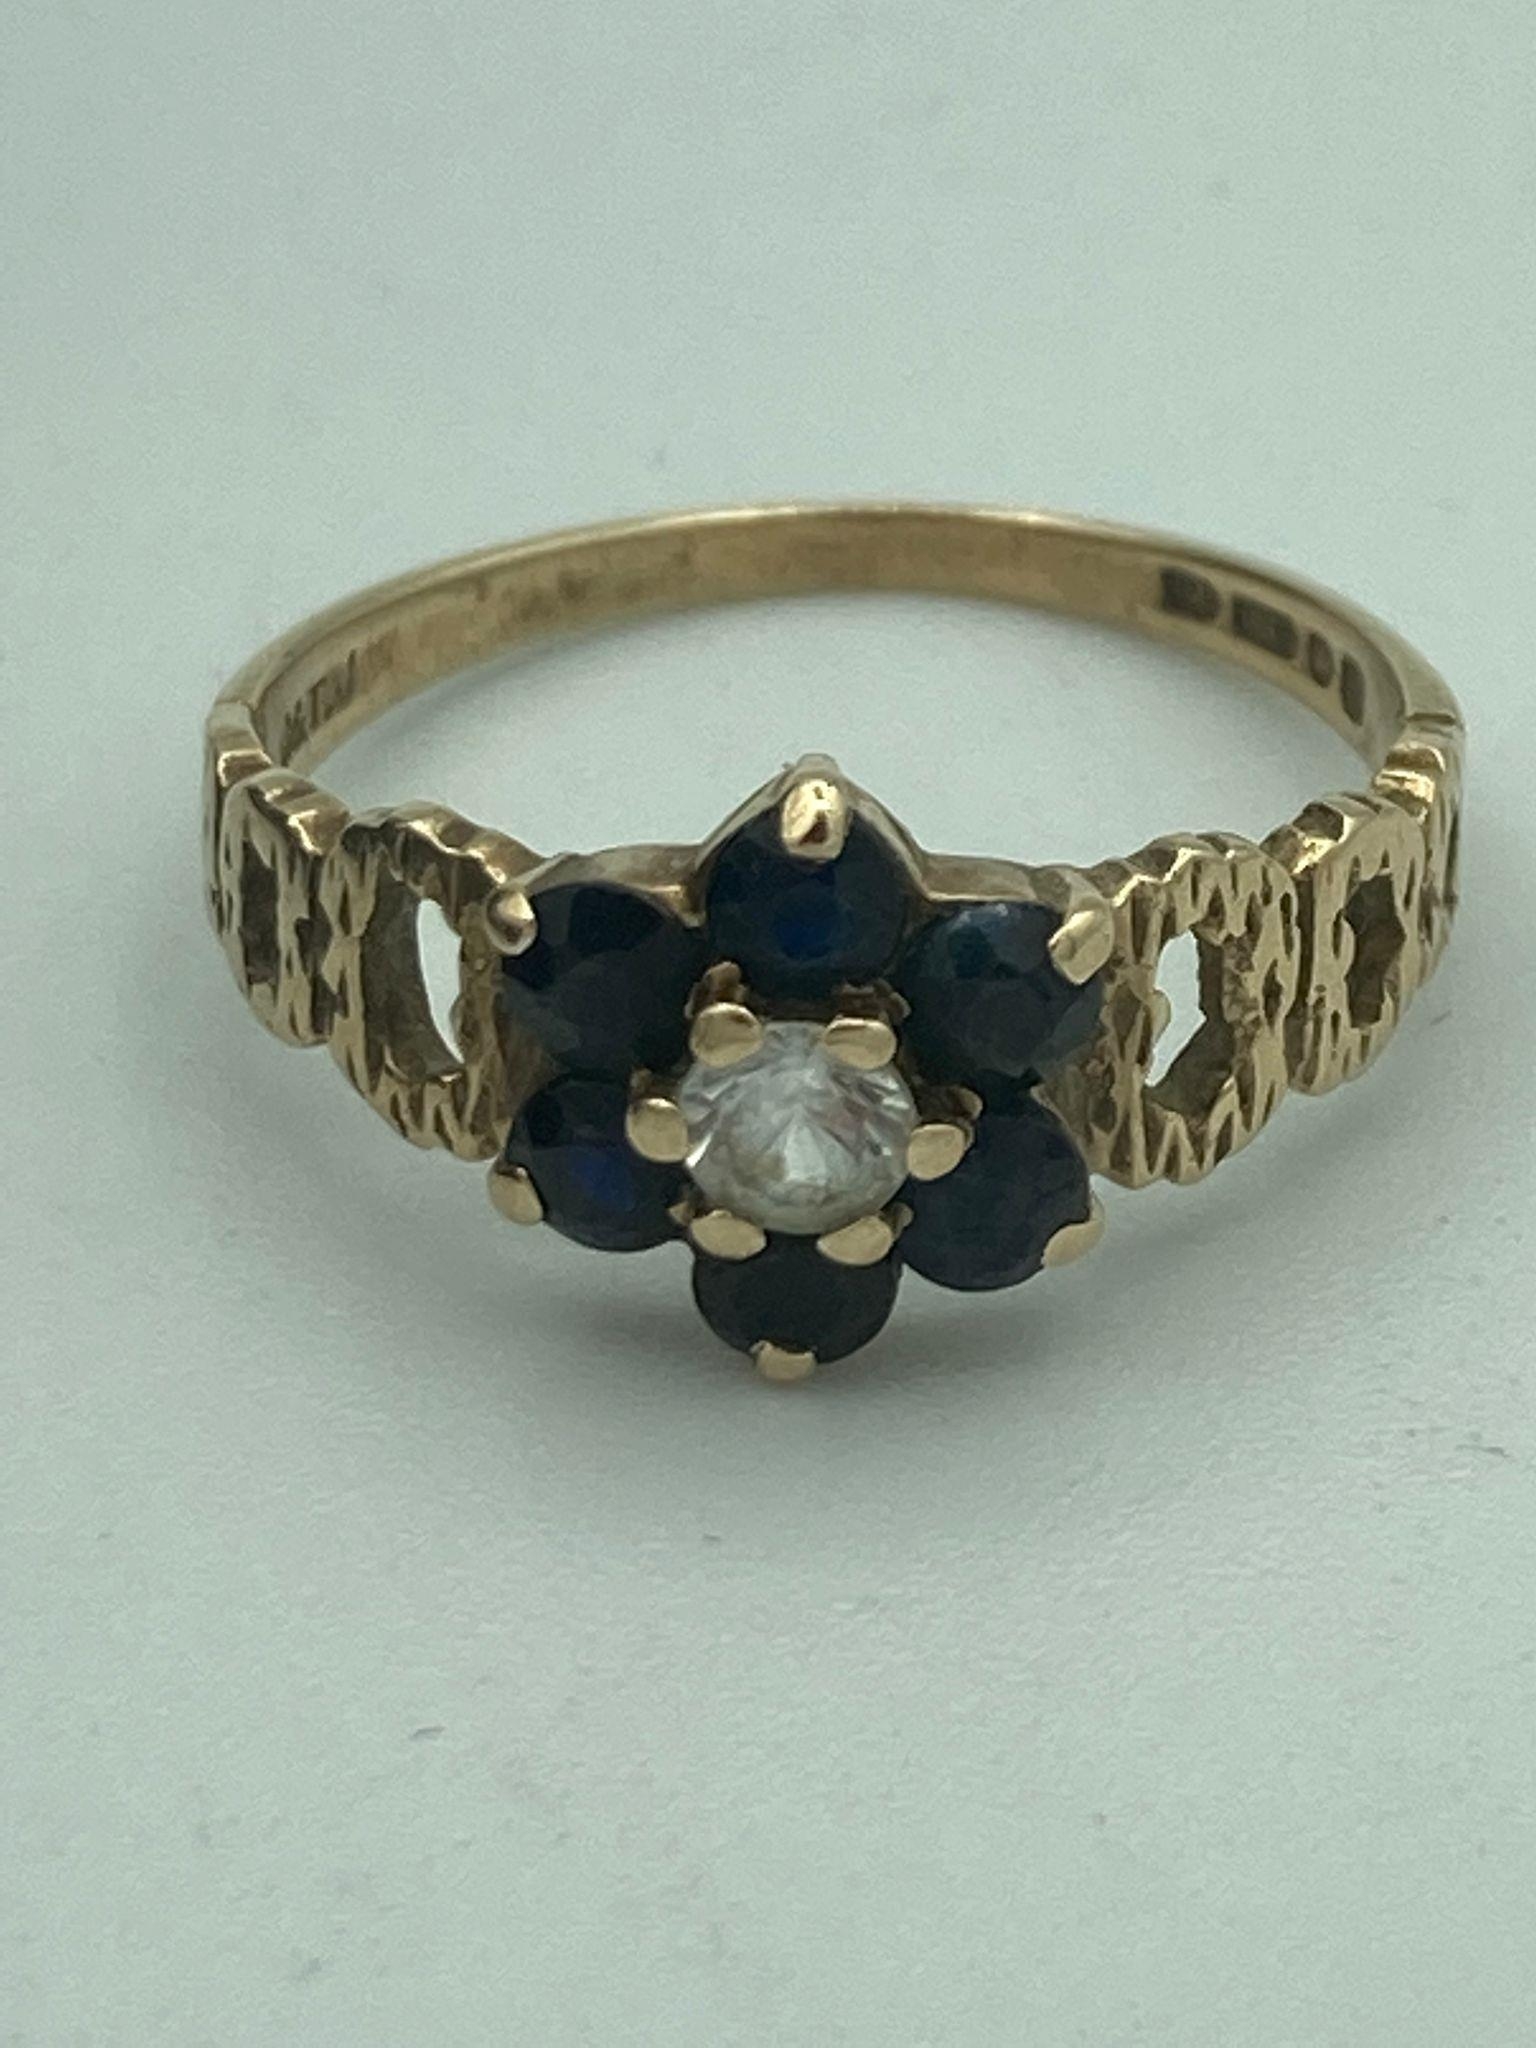 9 carat GOLD RING with SAPPHIRE CLUSTER and WHITE TOPAZ centre stone. Attractive gold open work